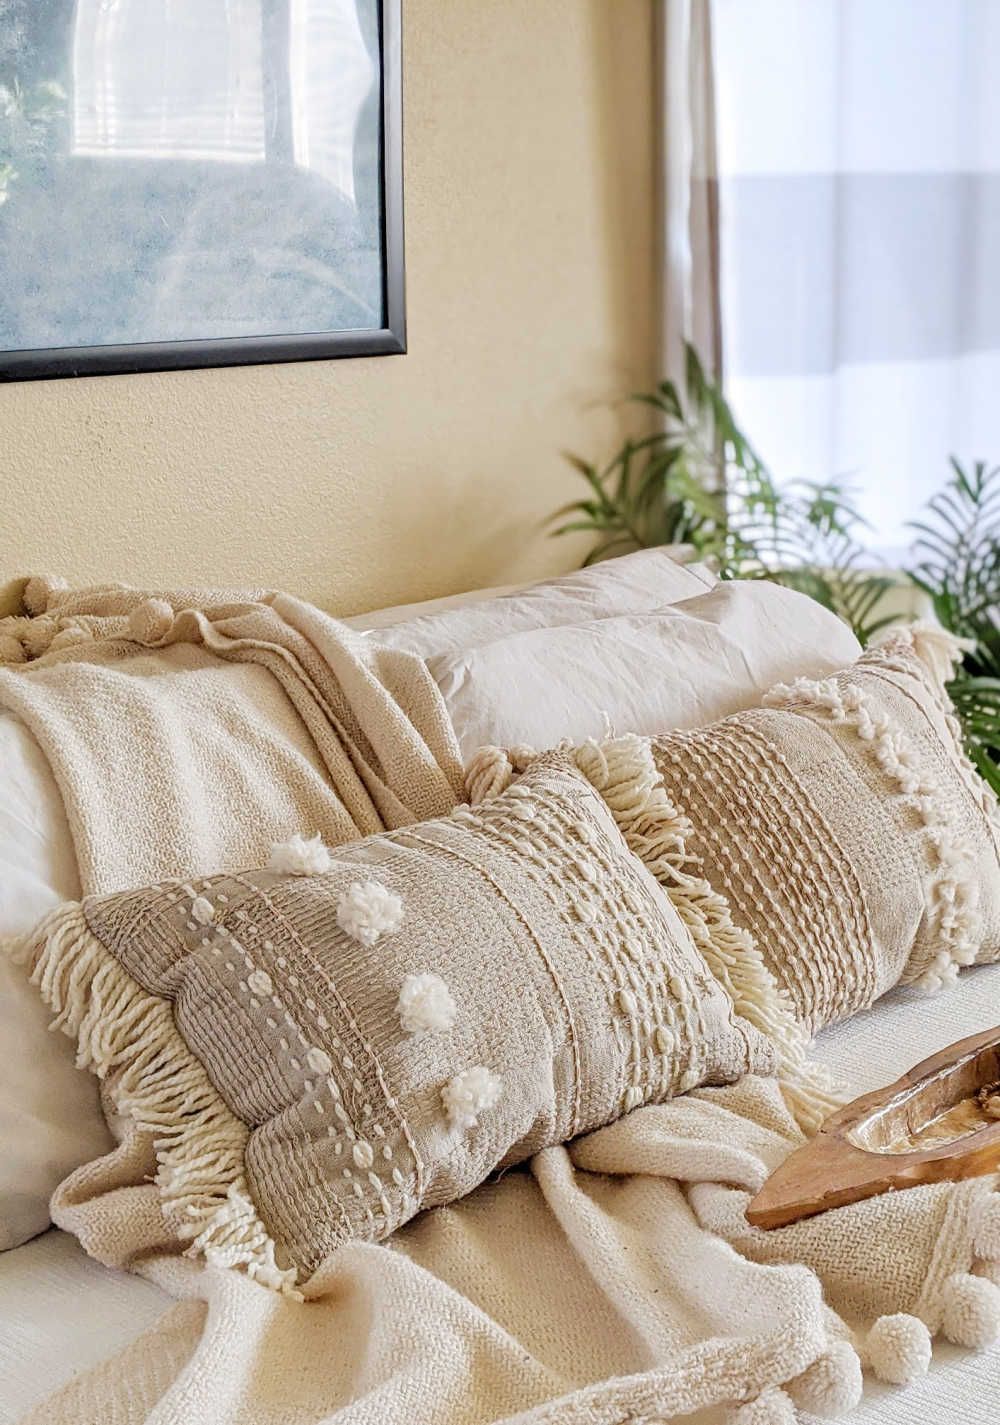 Make this Anthropologie-Inspired DIY Textured Pillow for $2! -   diy Pillows